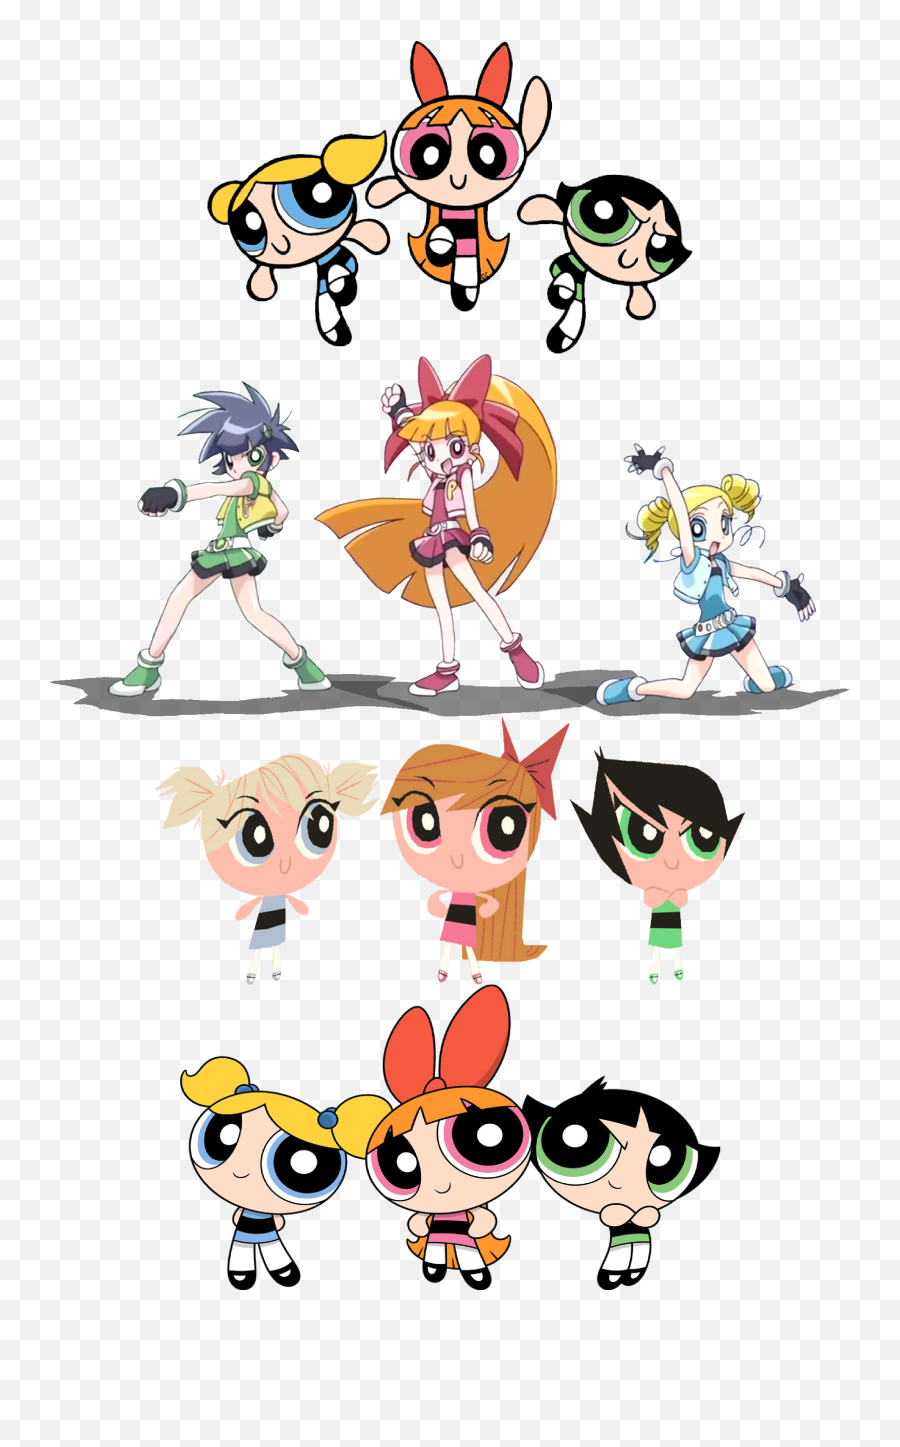 What Are Your Thoughts About The Powerpuff Girlsu0027 Stance - Powerpuff Girls 2016 Png,Powerpuff Girl Icon